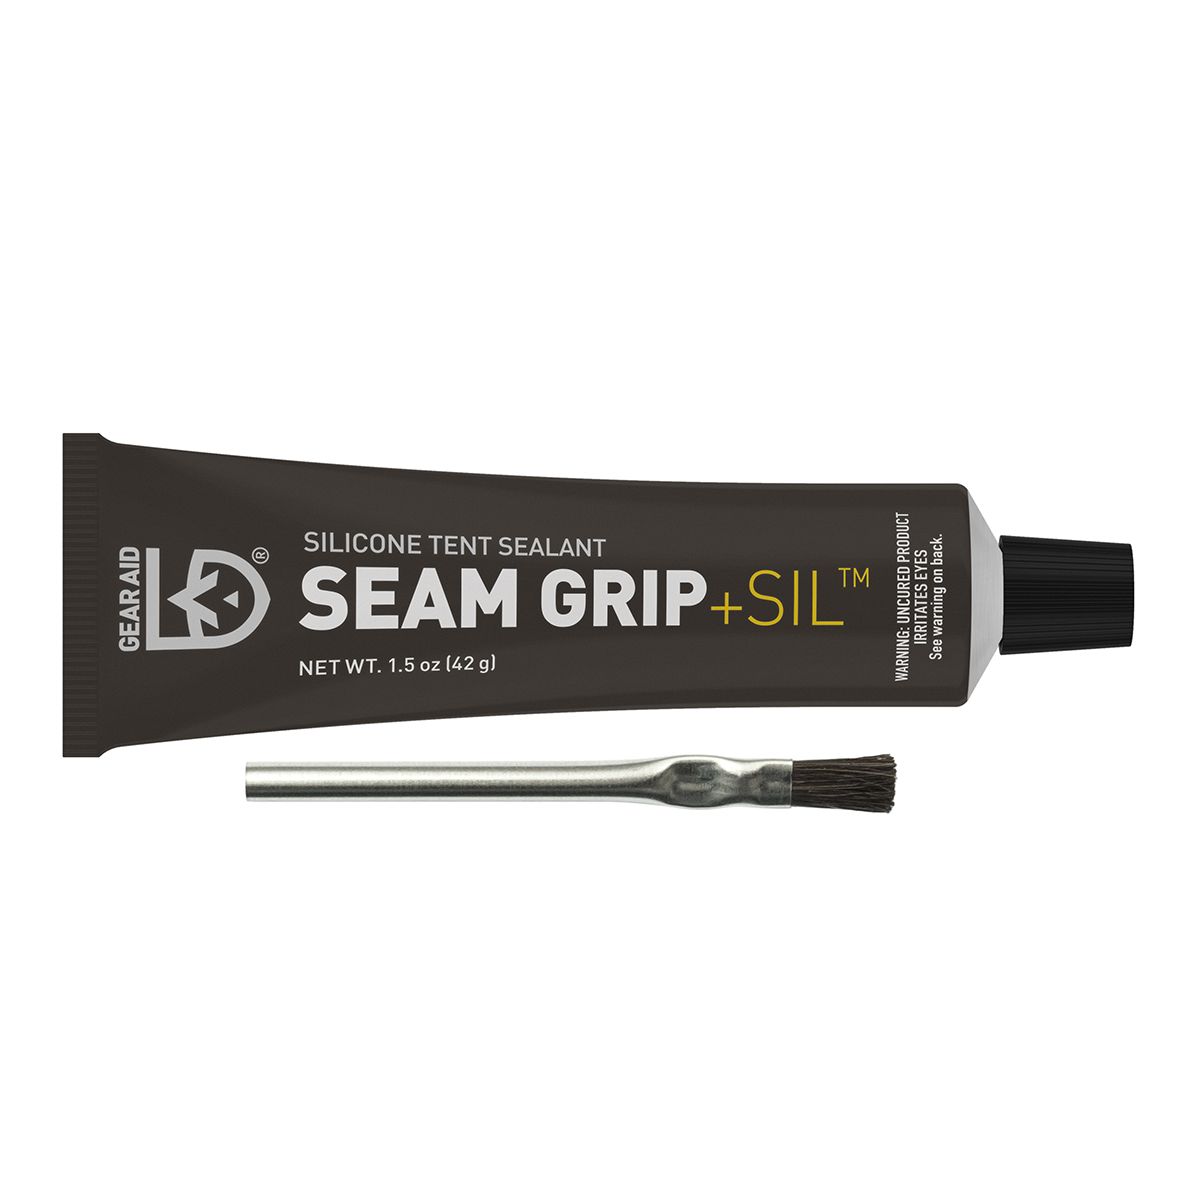 Image of Gear Aid Seam Grip SIL Silicone Tent Sealant